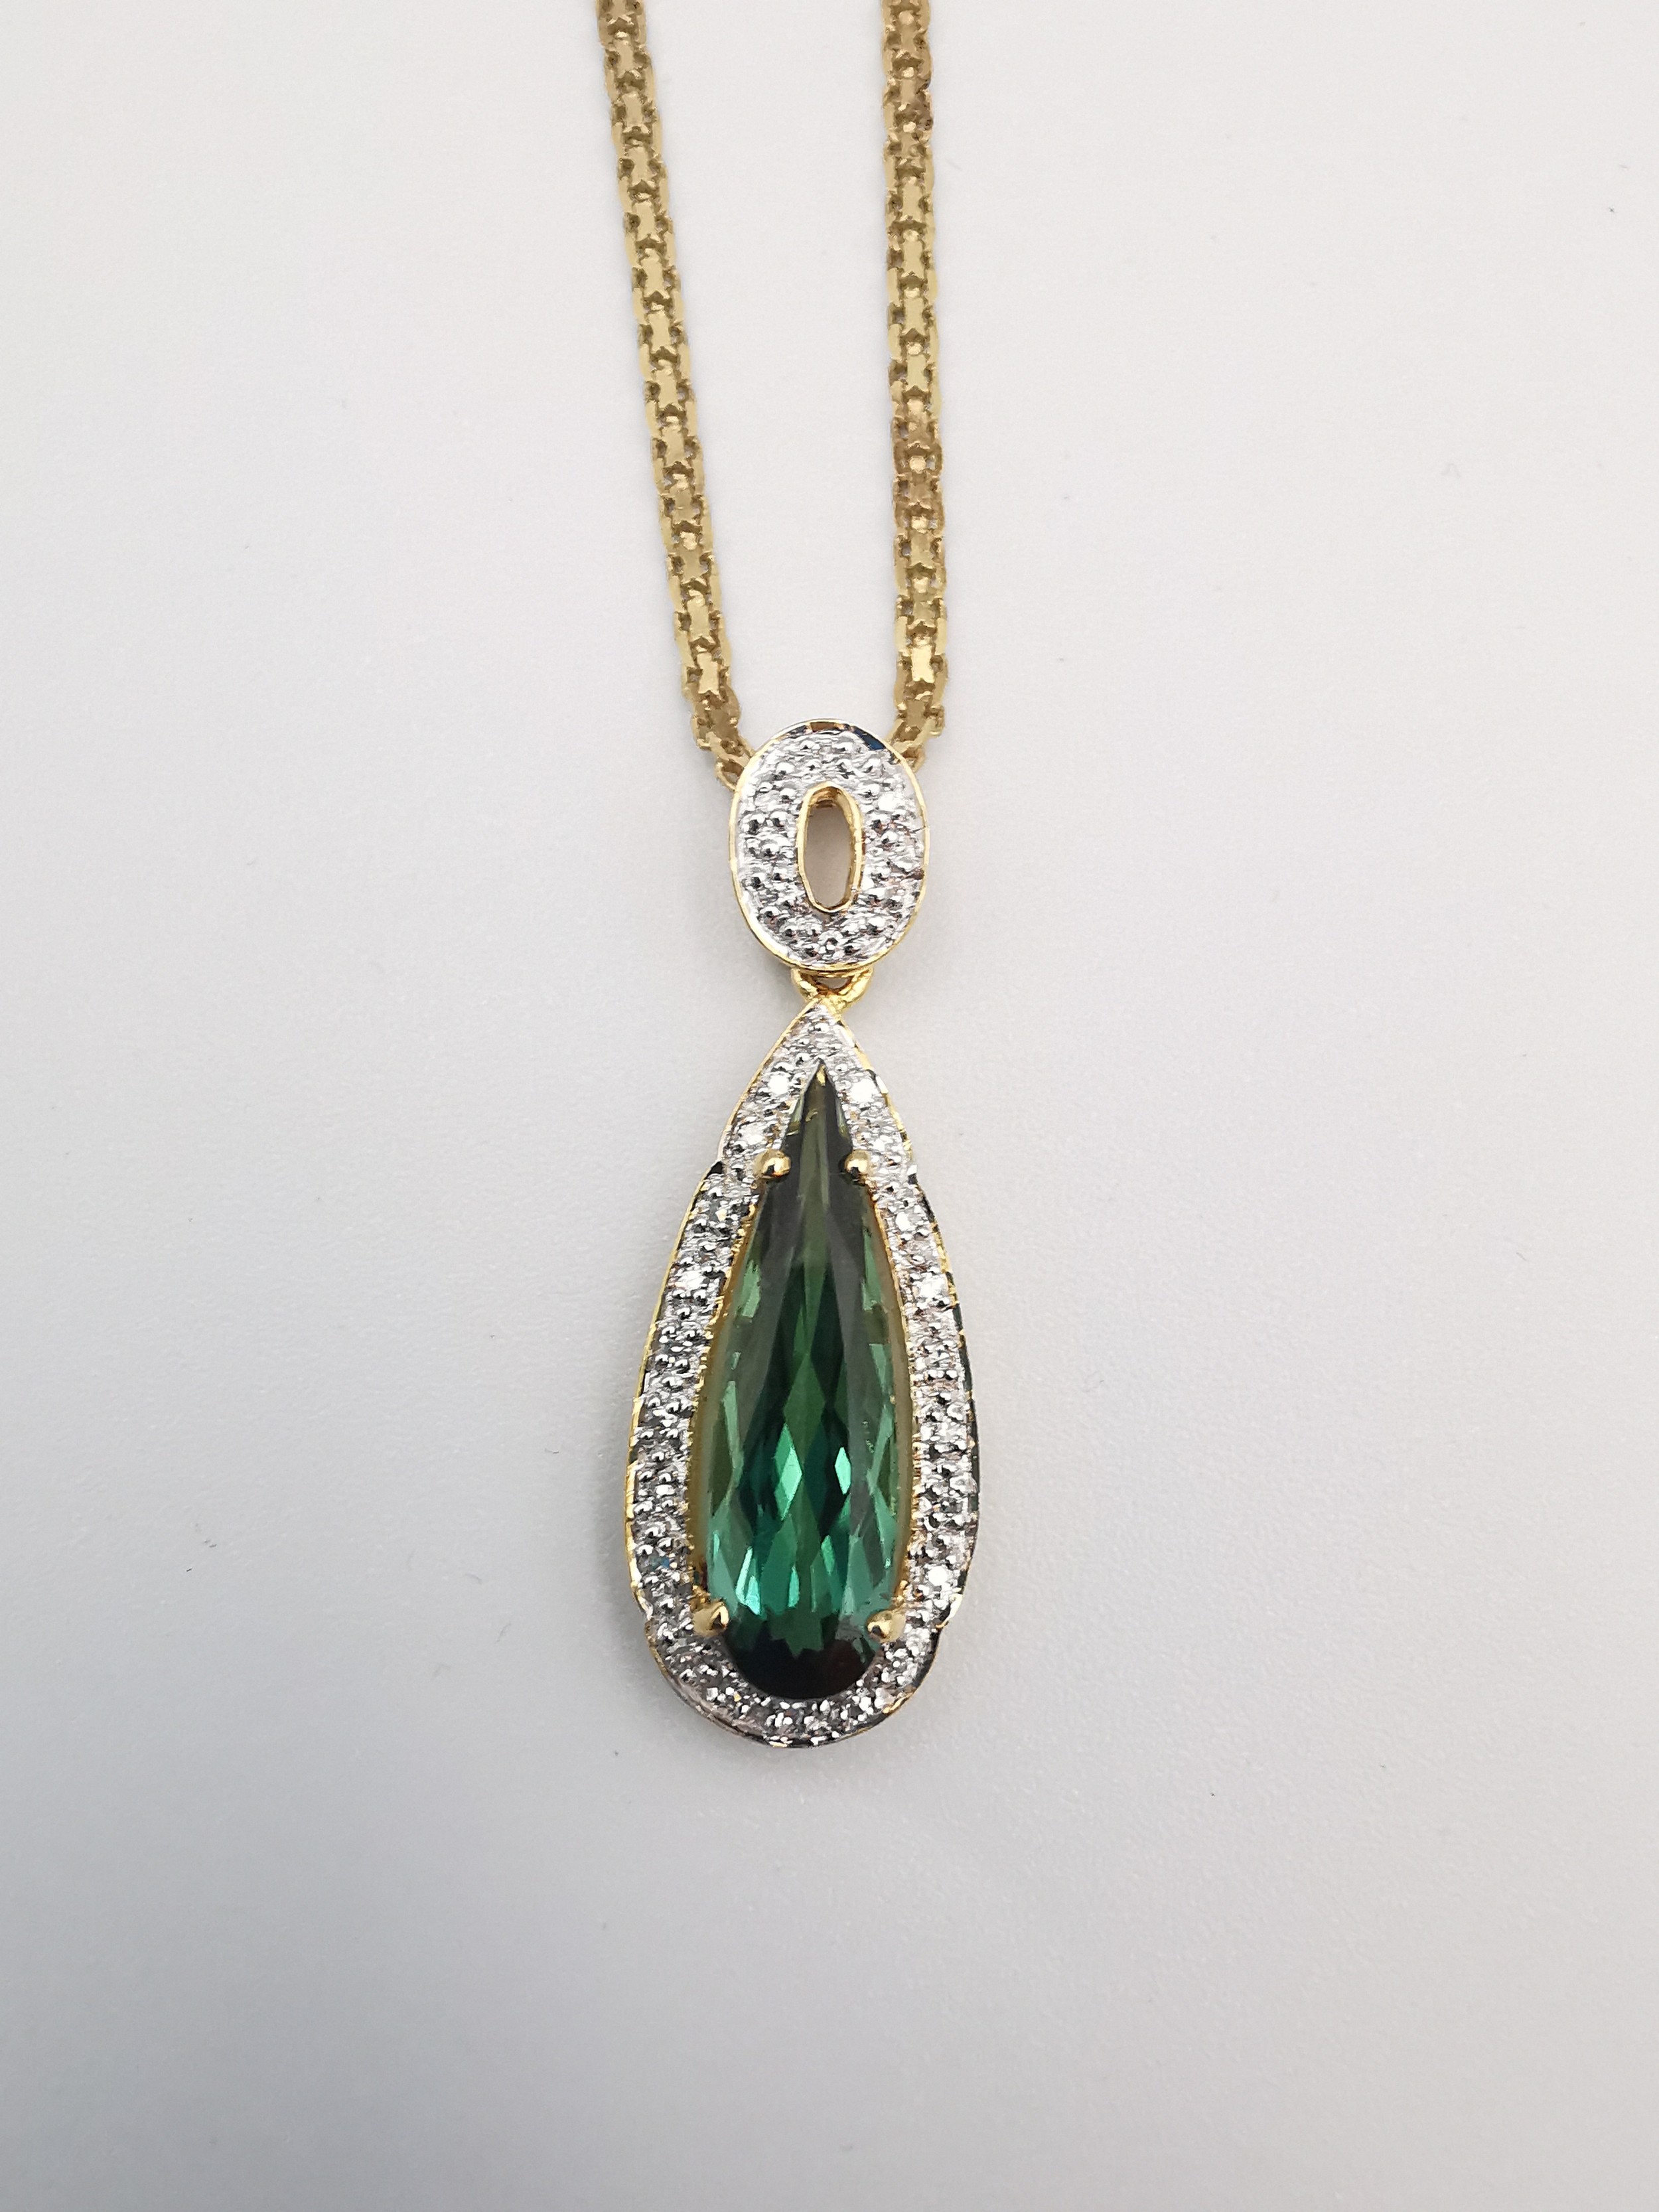 A cased 18 carat diamond and Santa Rosa tourmaline drop pendant on a gold plated silver rope